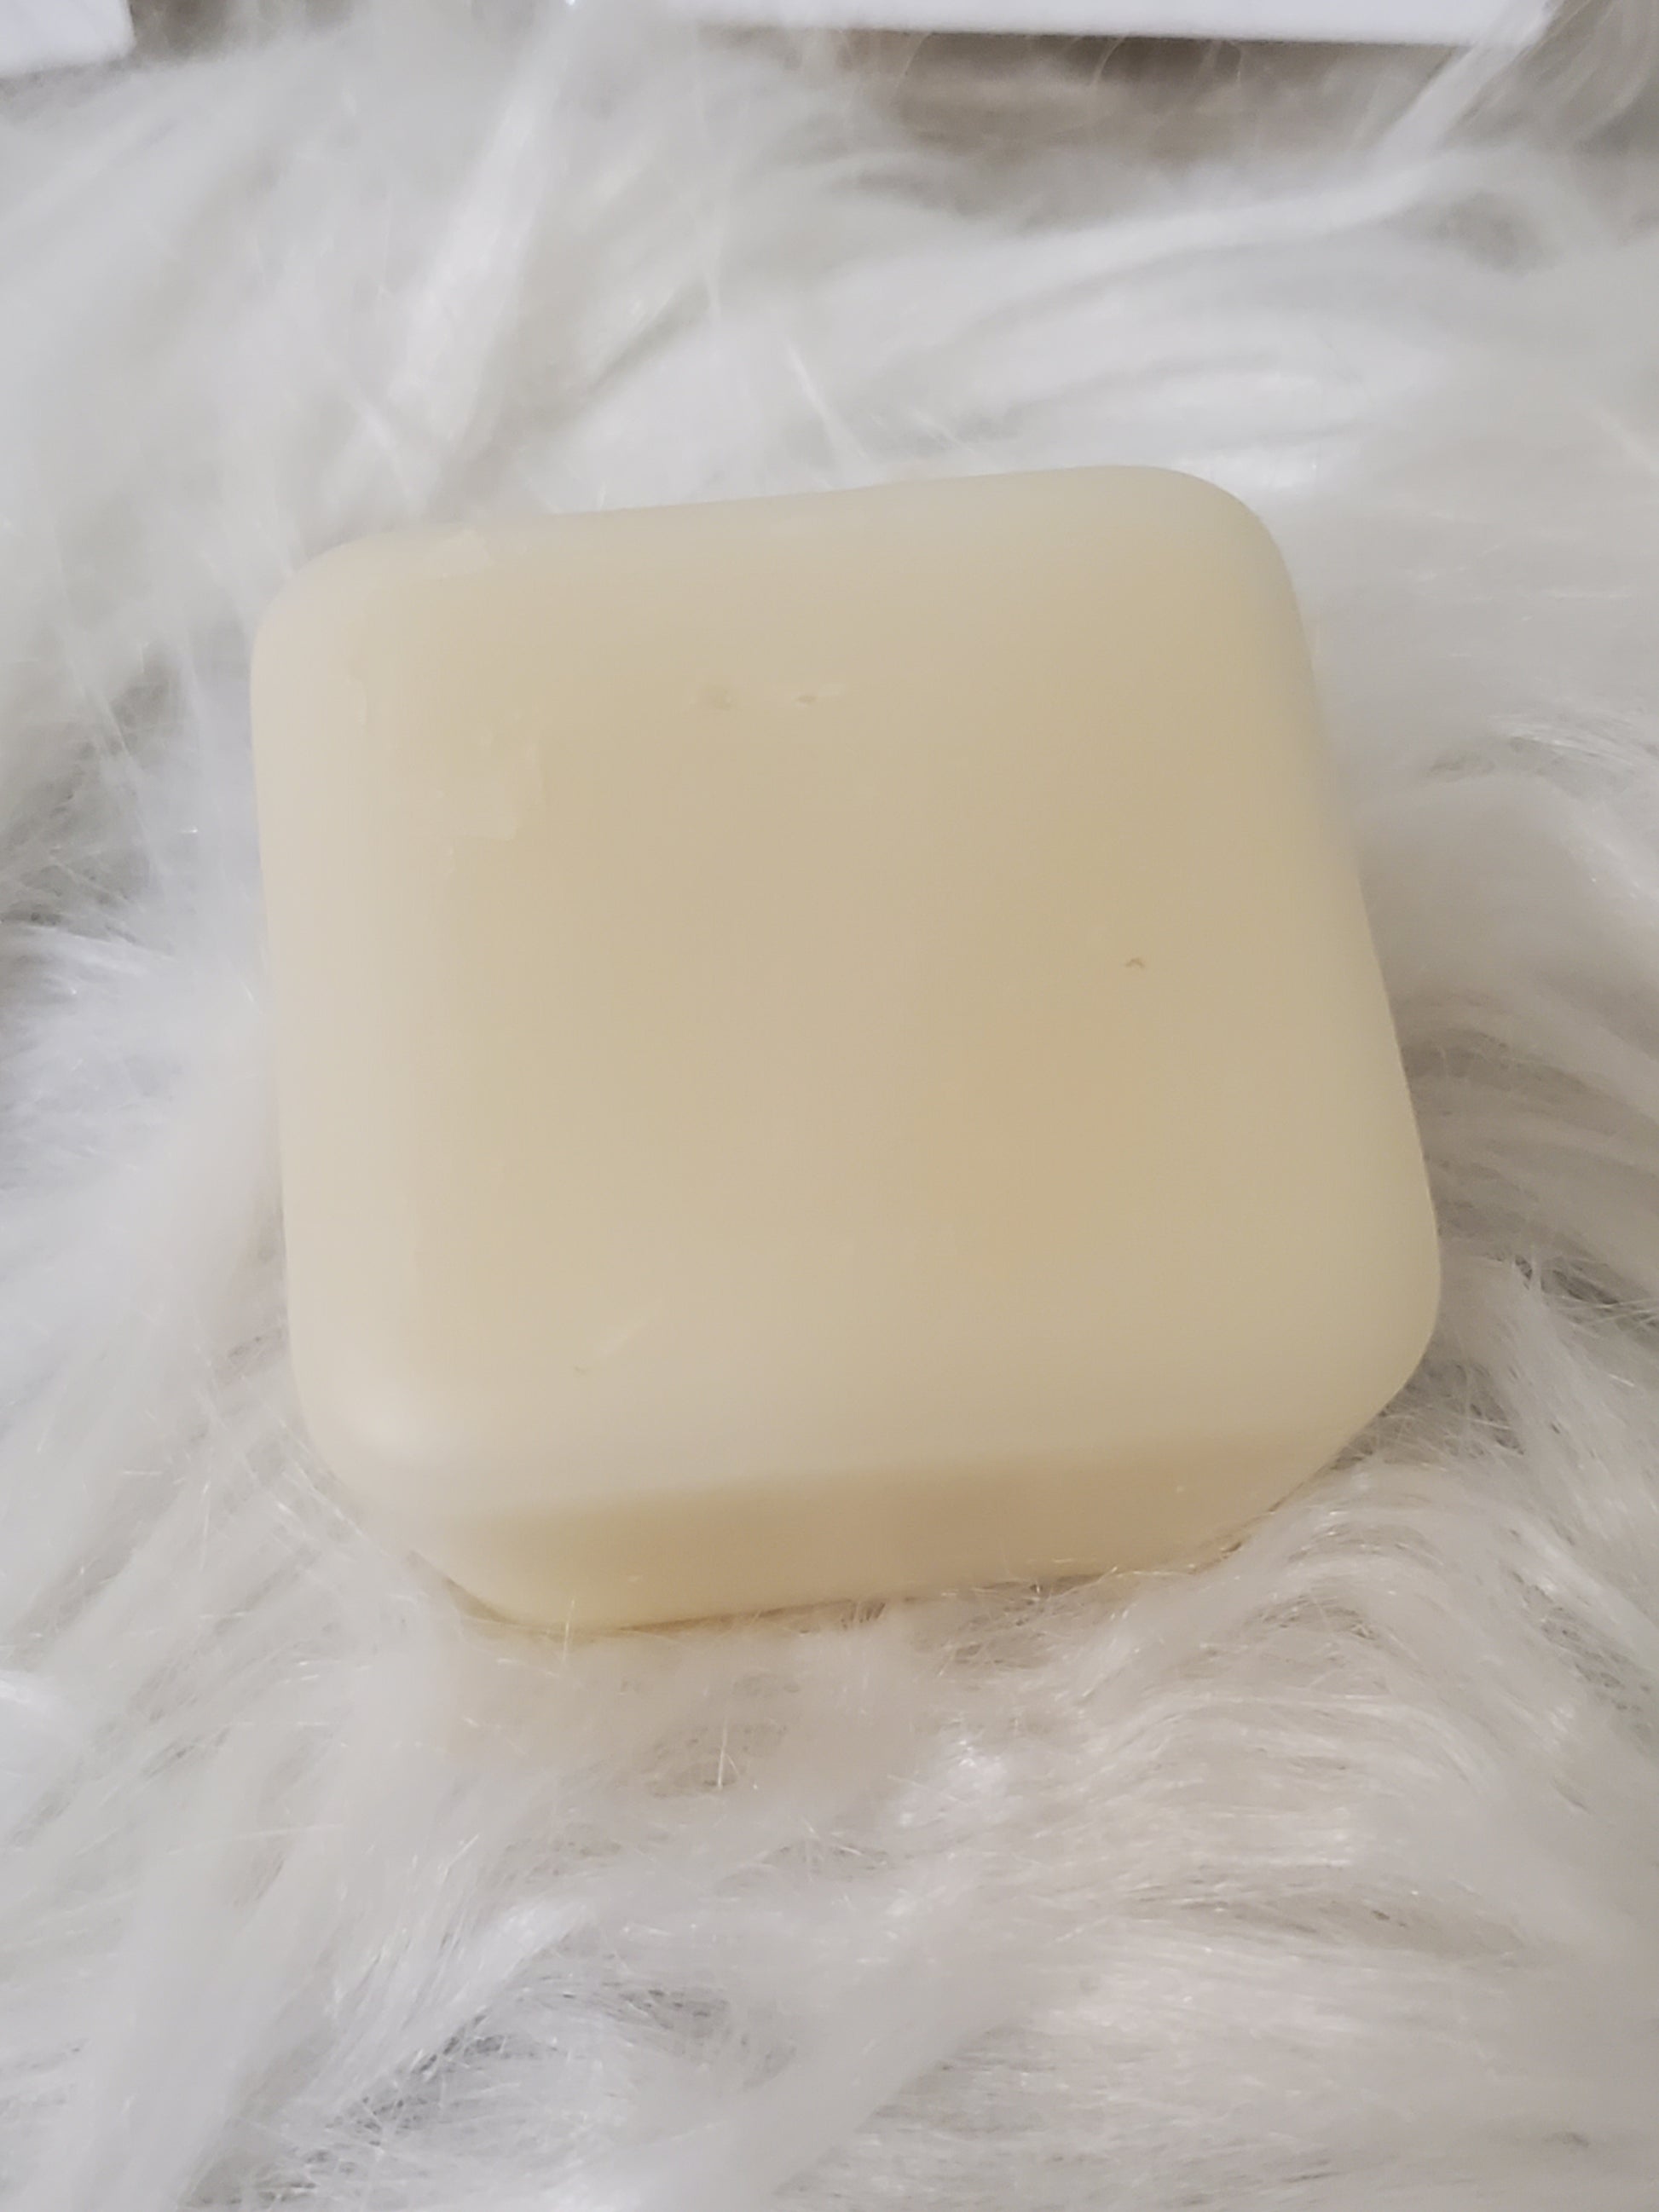 Sample-sized wax melts for you to enjoy. Every flavor will now be offered as a sample size as well as a full clamshell. You will be able to choose from any scent or a maker's mystery scent. Our wax melts are made of high-quality soy wax, beeswax, and fragrance oils. Order ship within 2 business so you can start enjoying them sooner.